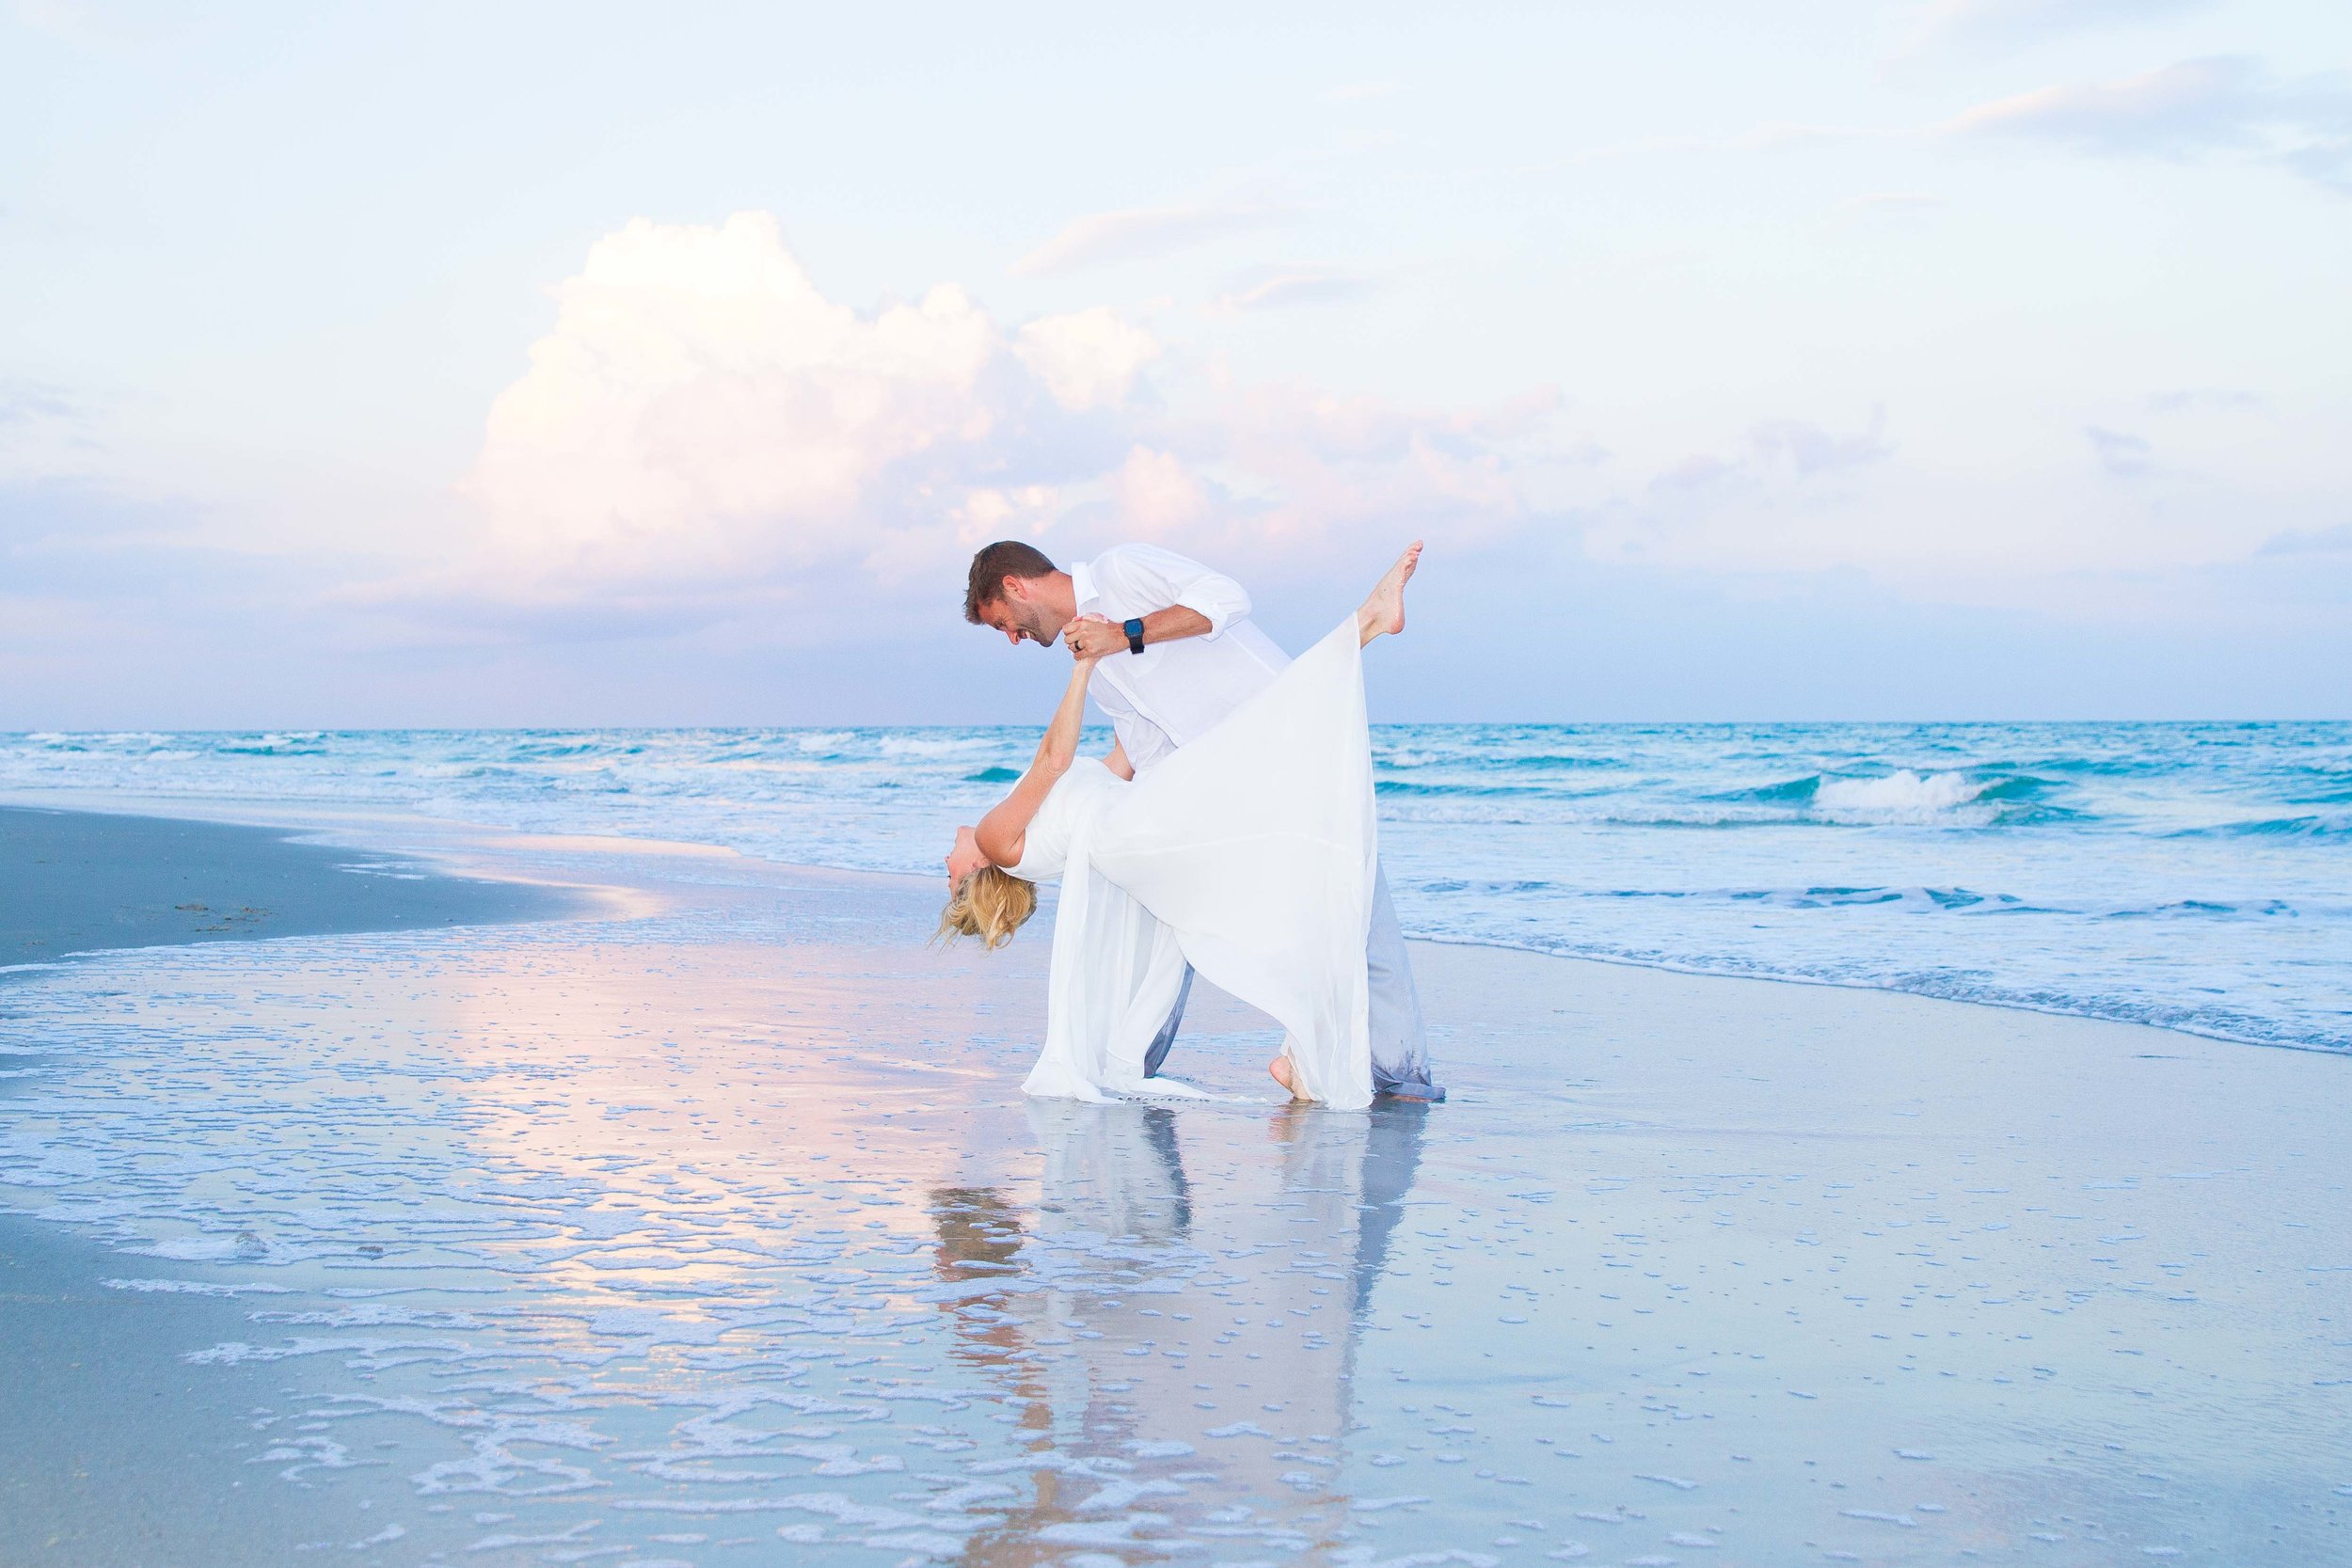  Husband dips his new wife while dancing on the blue beach 